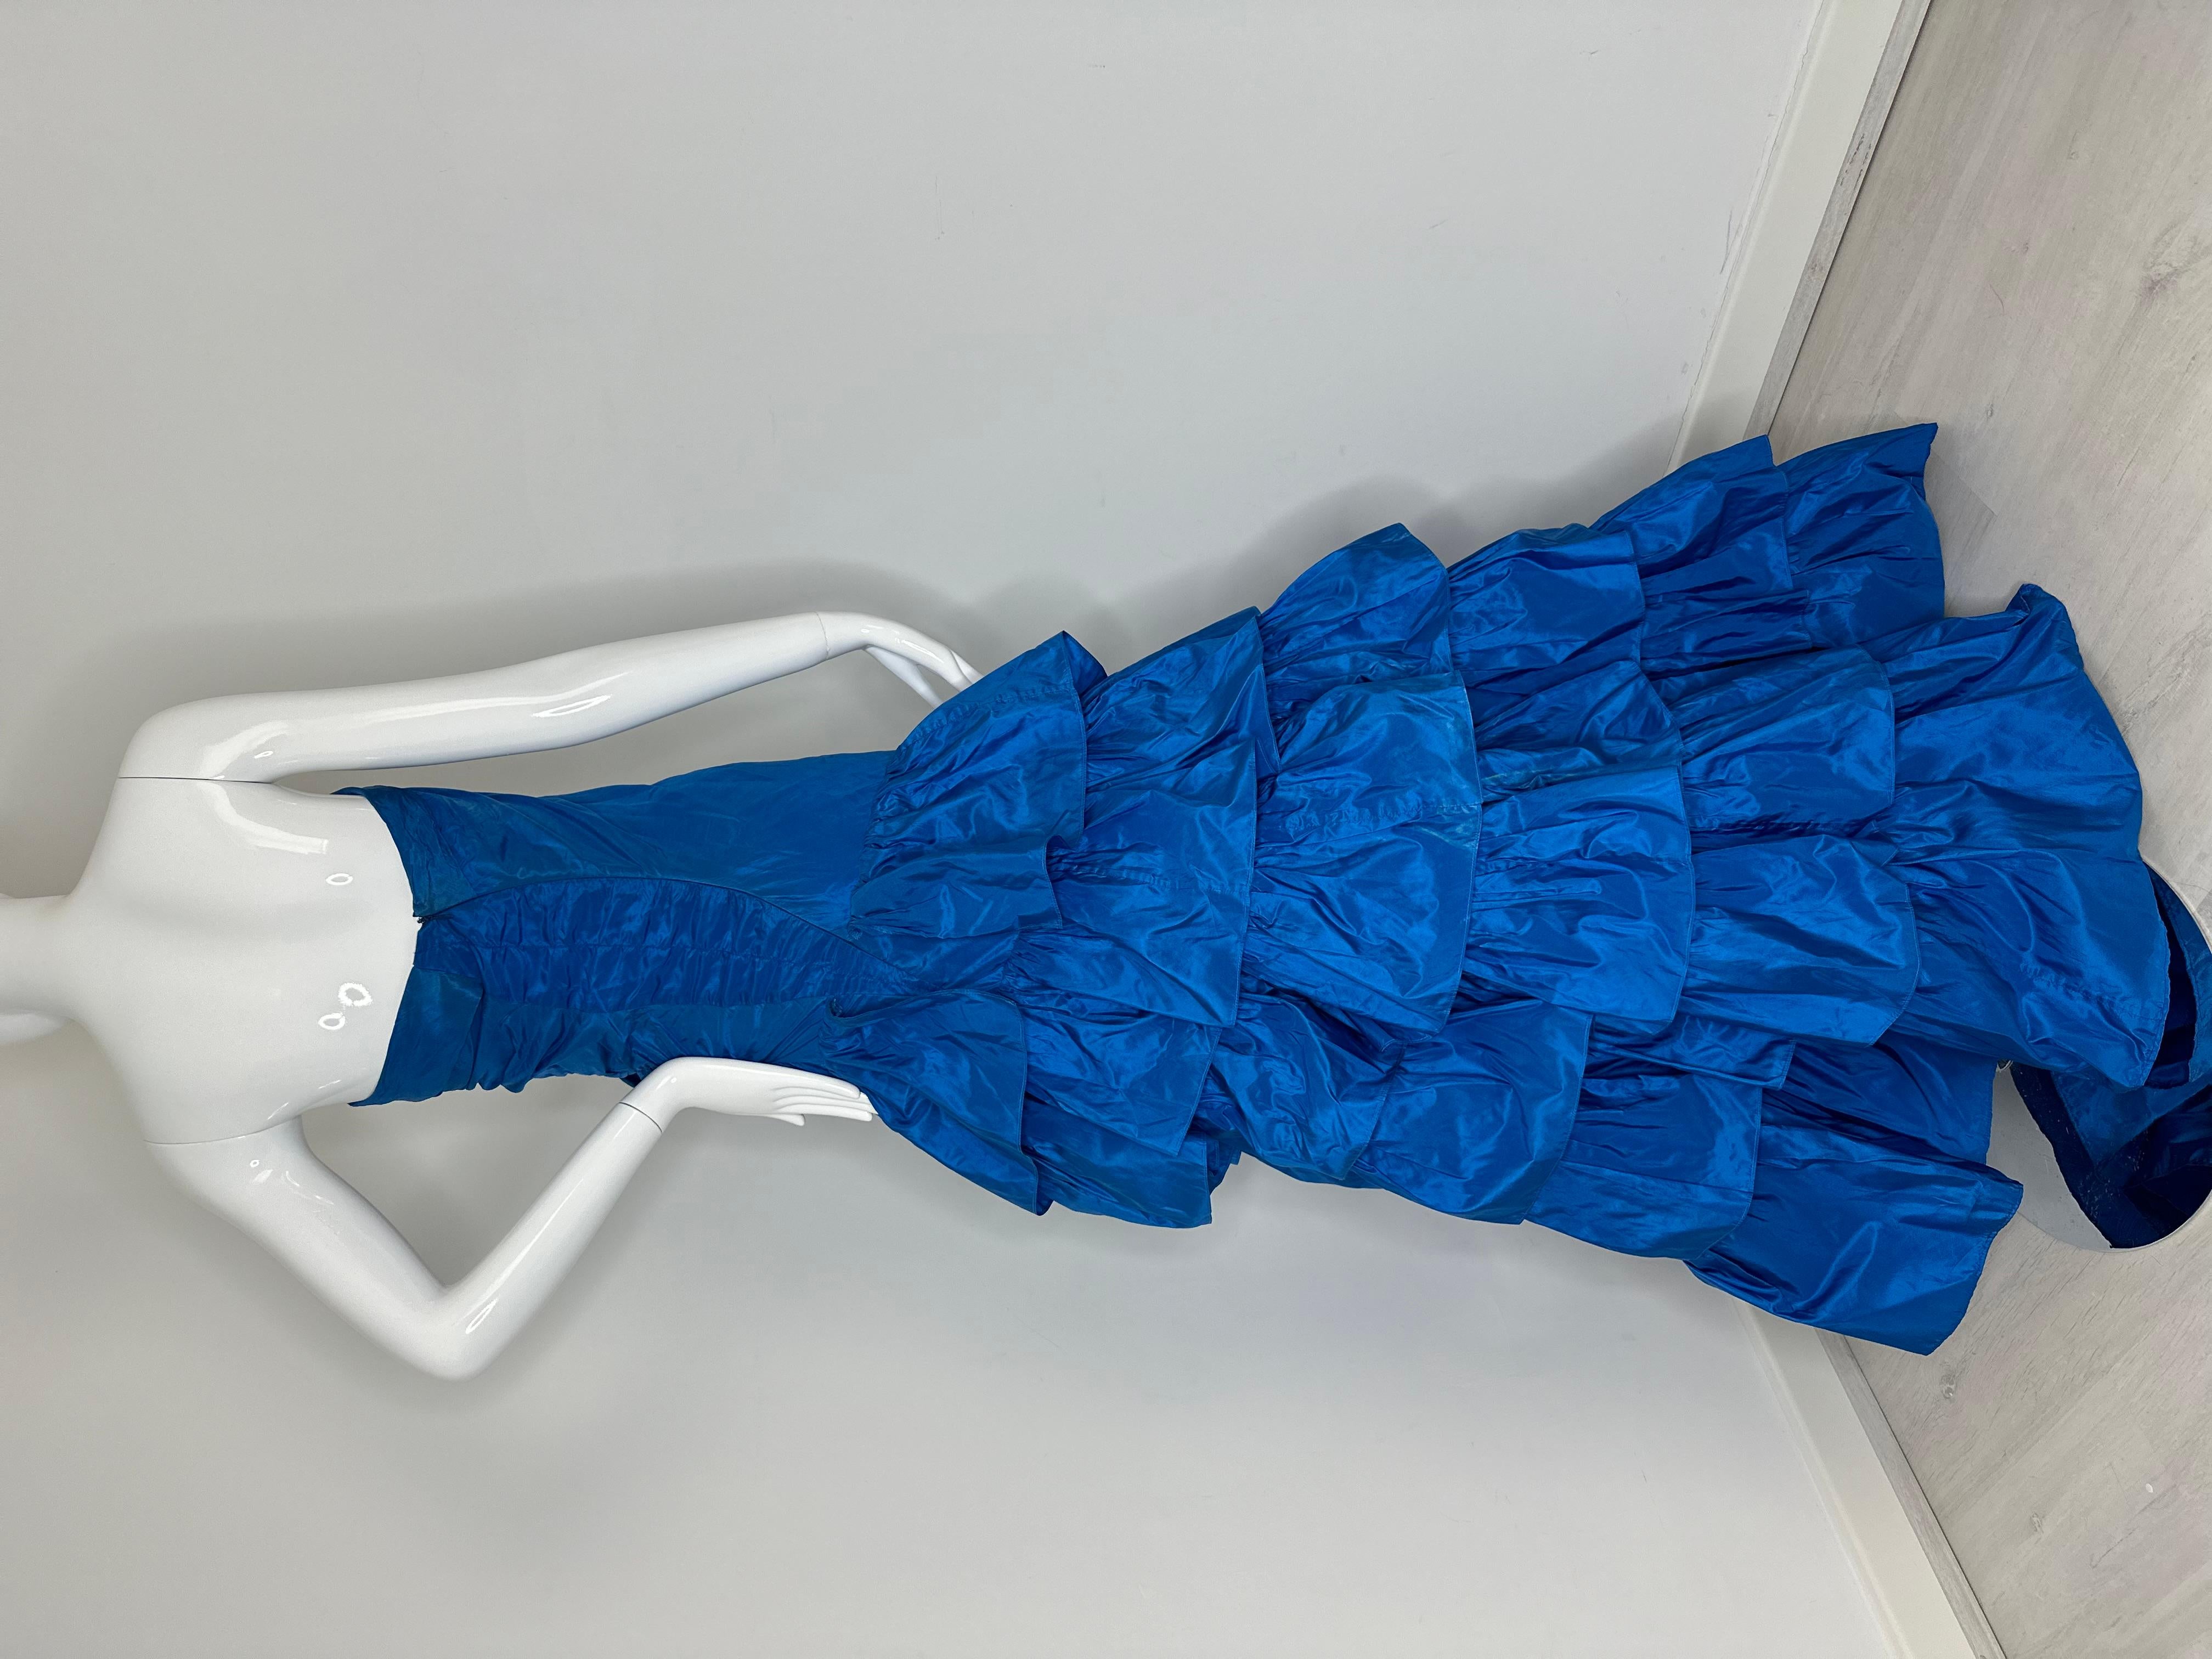 Roberto Cavalli 2005 Blue tiered maxi gown dress For Sale 9